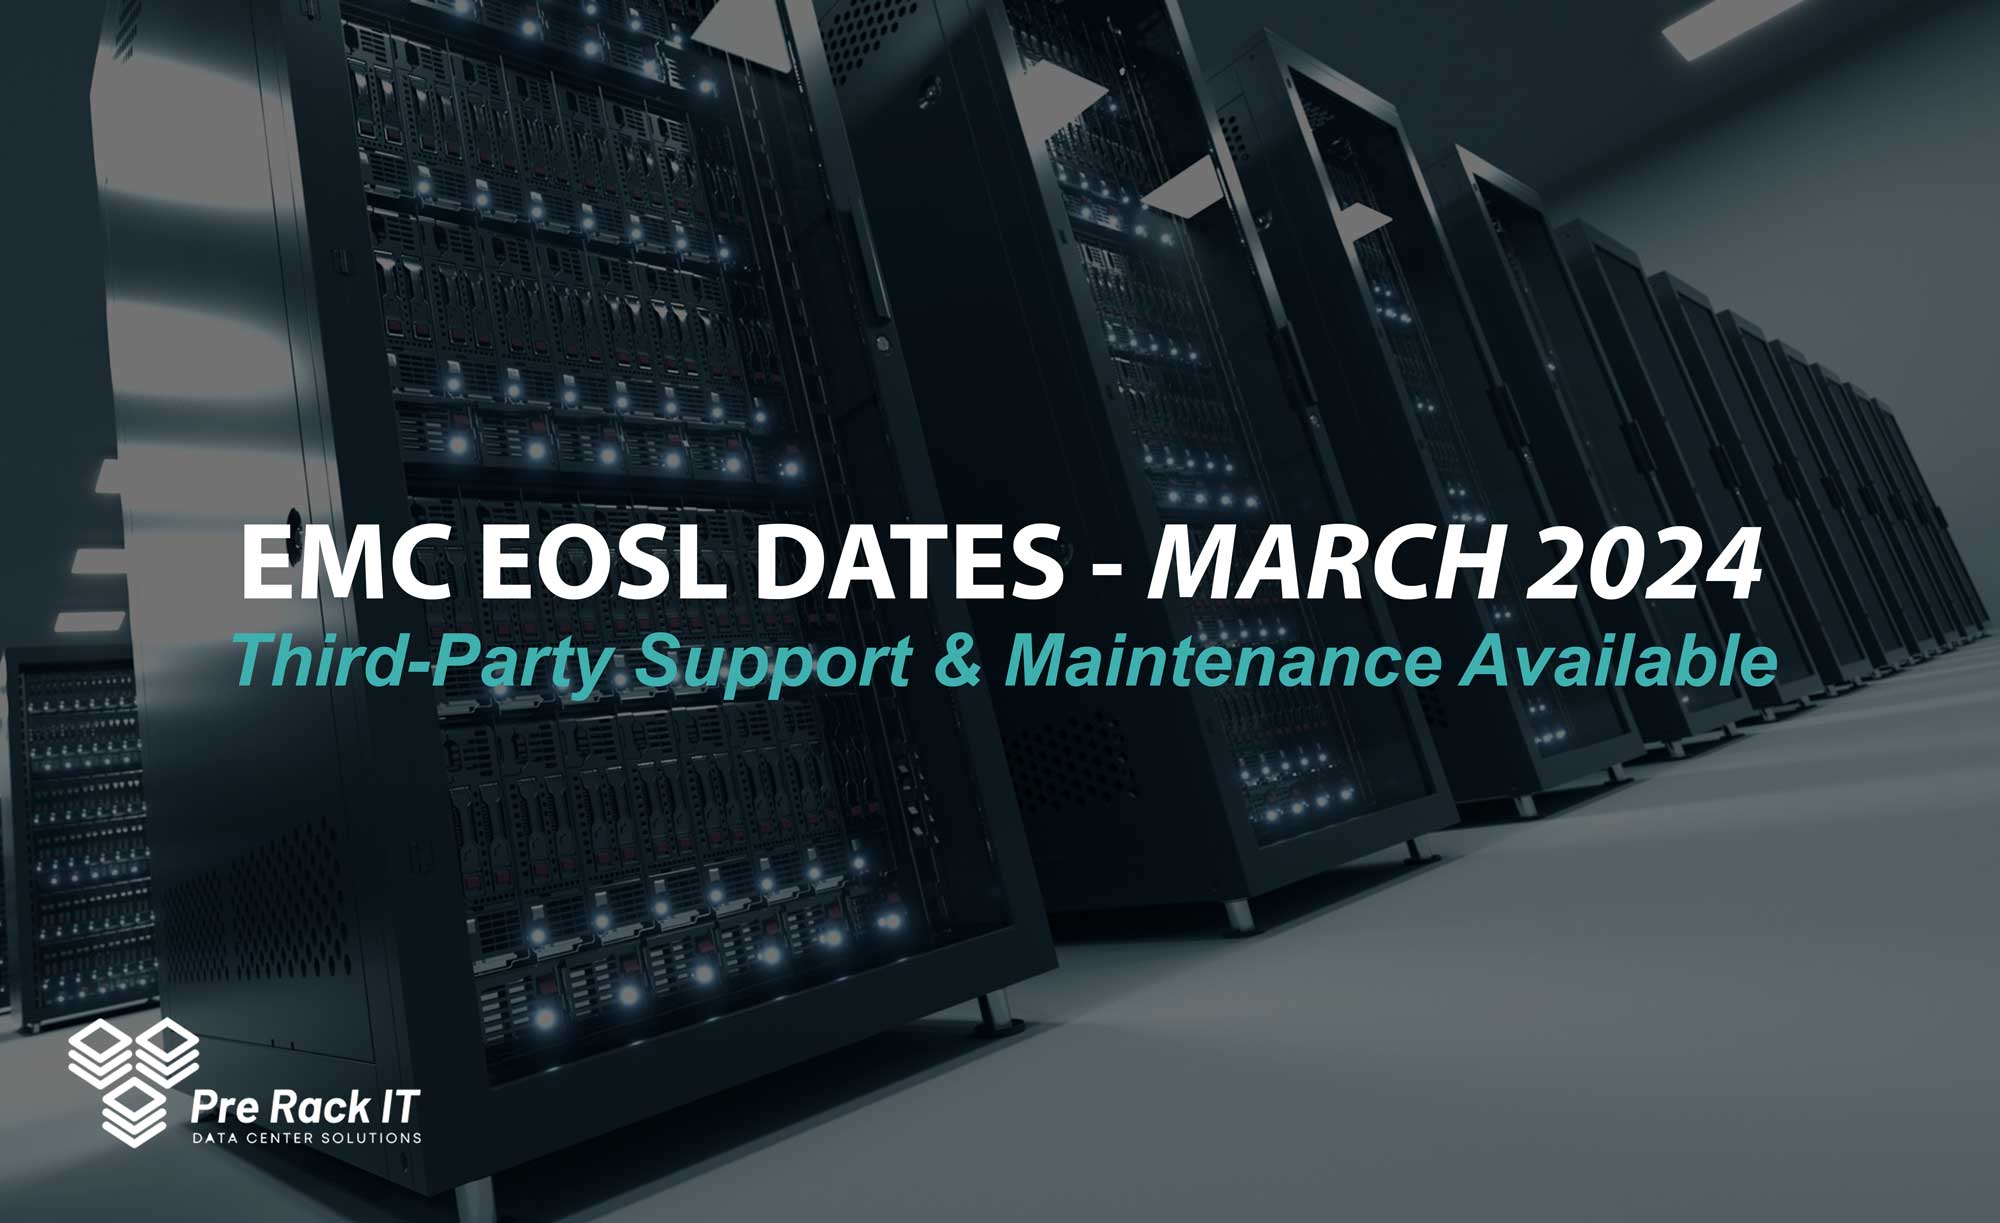 Upcoming EOSL Dates for Dell EMC - March 2024